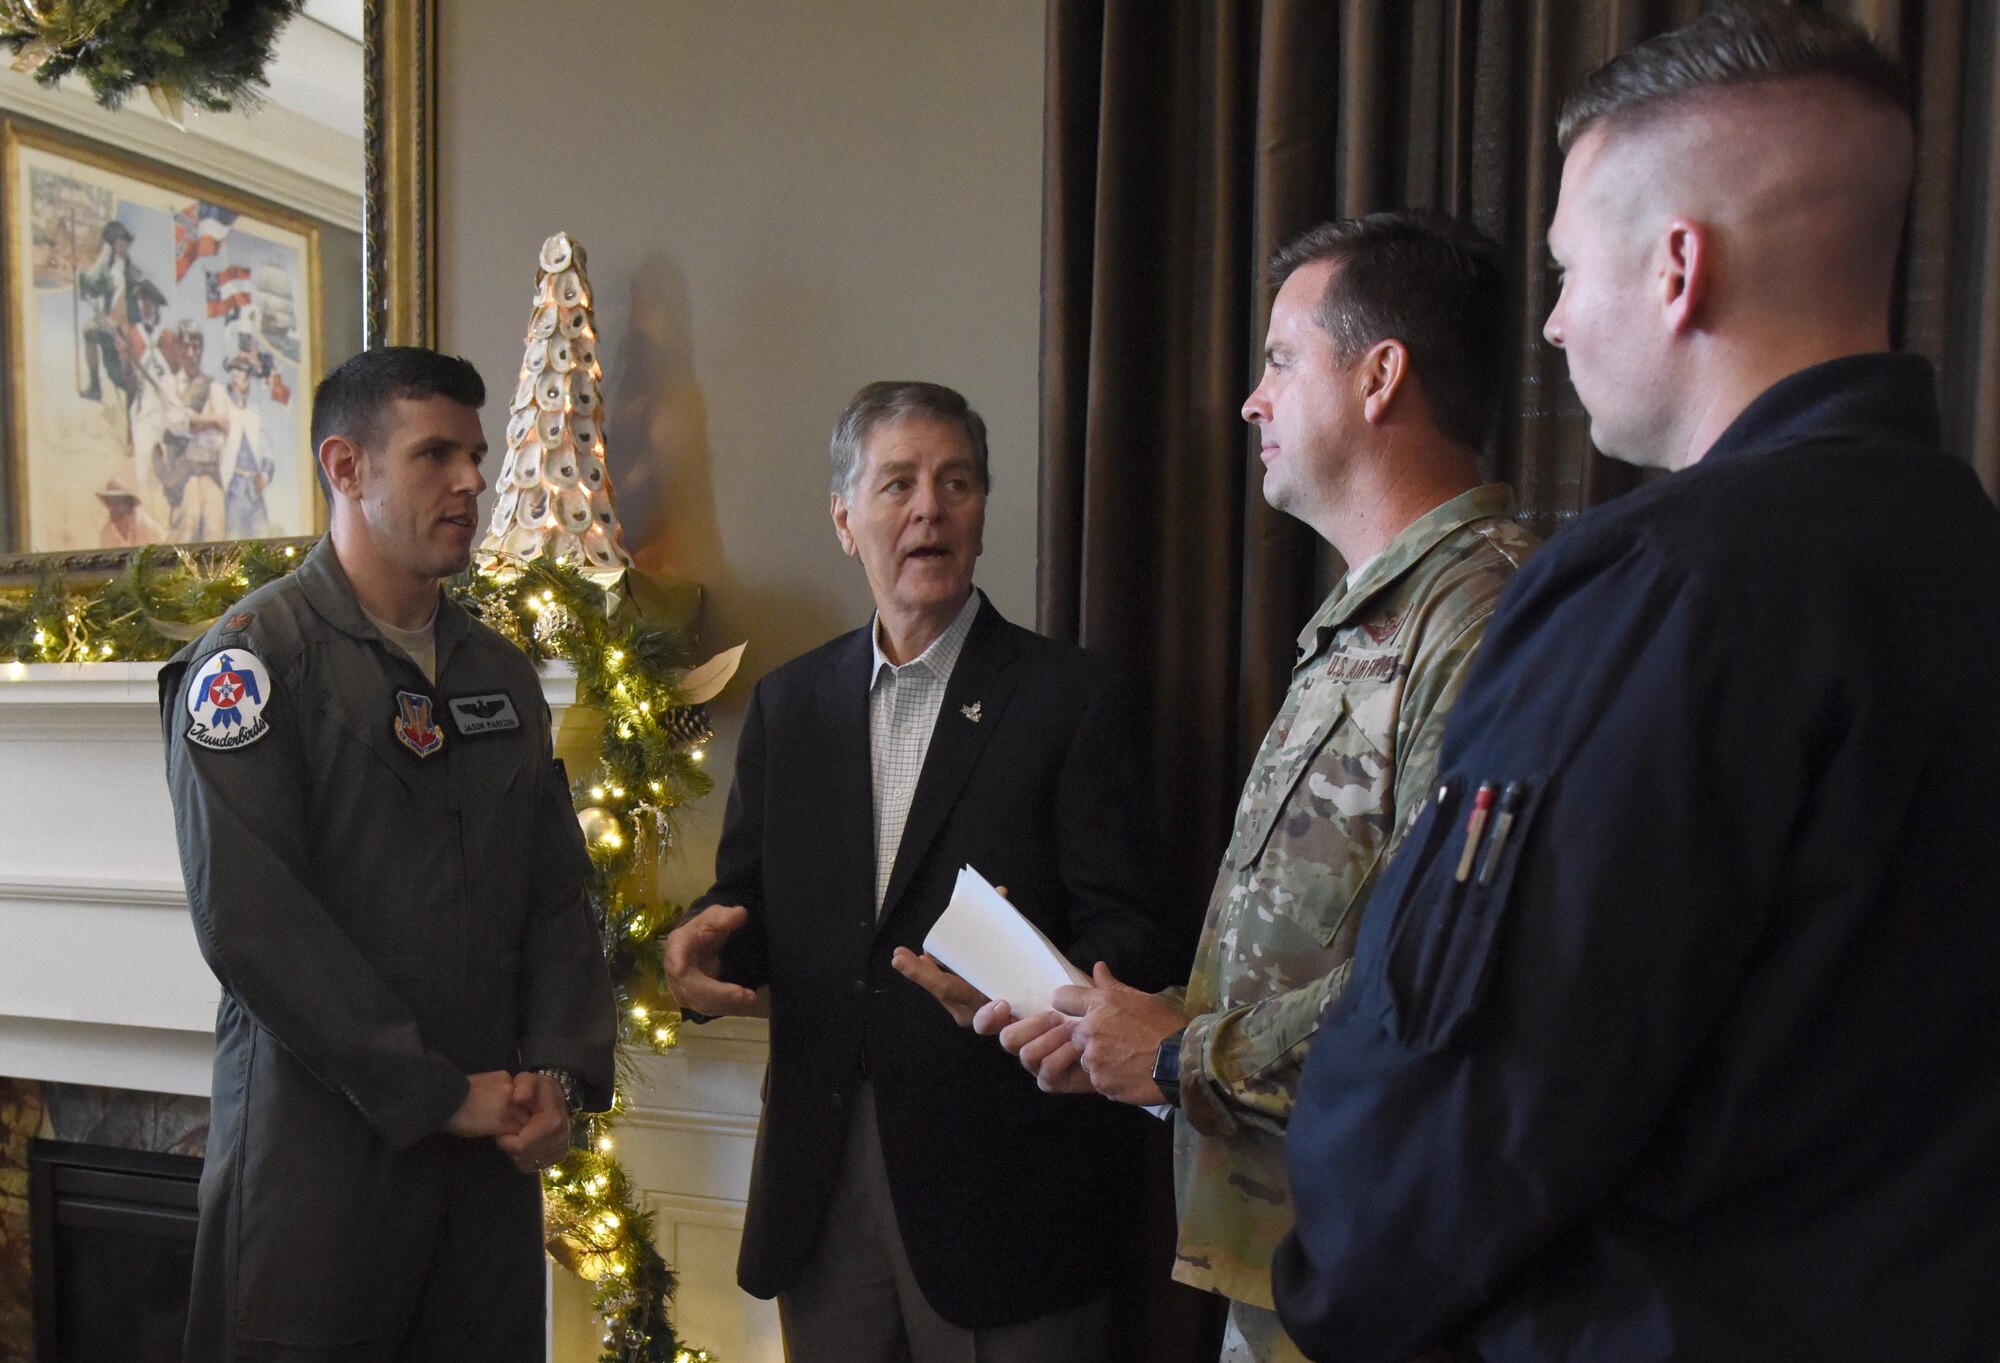 Andrew "Fo Fo" Gilich, Biloxi mayor, speaks with U.S. Air Force Col. Lance Burnett, 81st Training Wing vice commander, and Maj. Jason "Flack" Markzon, inbound Thunderbird pilot #8, during a press conference formally announcing Thunder Over the Sound: The Keesler and Biloxi Air and Space Show at the Biloxi Visitors Center, in Biloxi, Mississippi, Dec. 18, 2018. The press conference reviewed and confirmed information and acts for the air show and allowed attendees to meet with and ask questions of all speakers. (U.S. Air Force photo by Kemberly Groue)